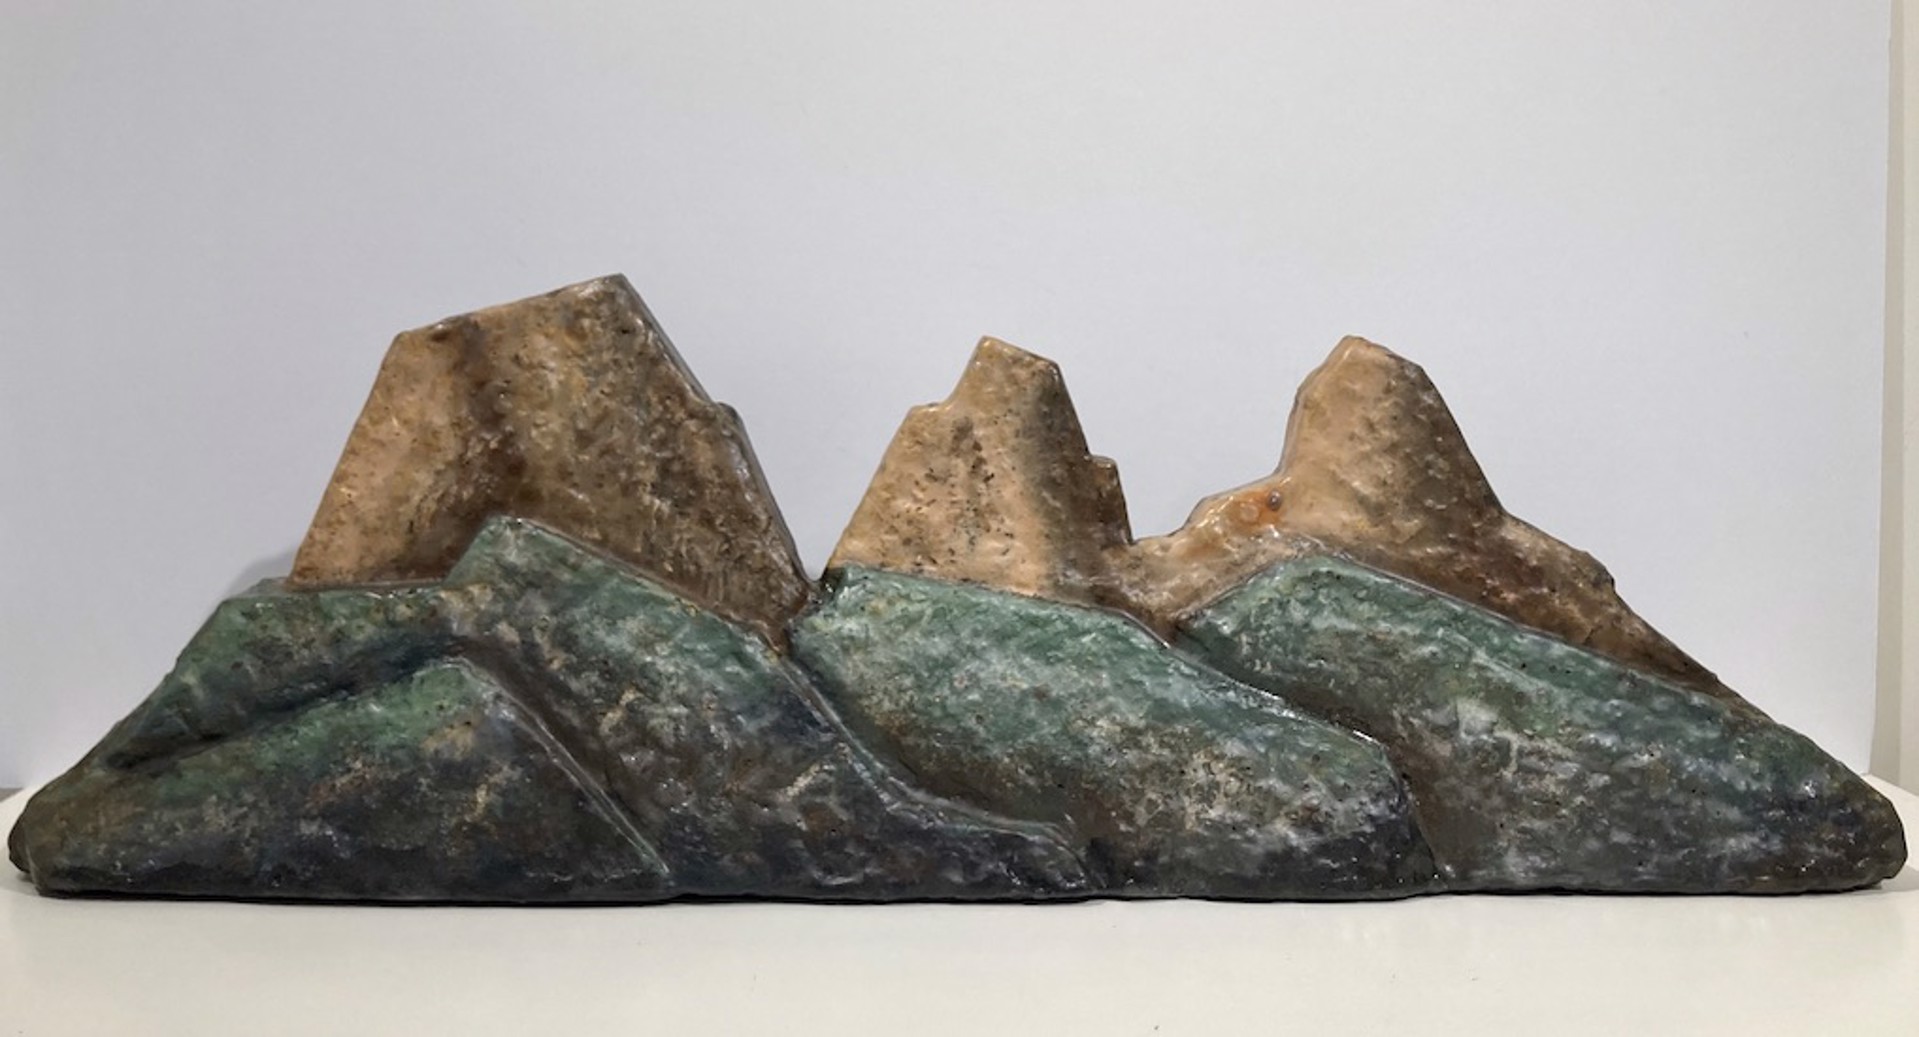 Solid Mountains 1 by Allan Waidman